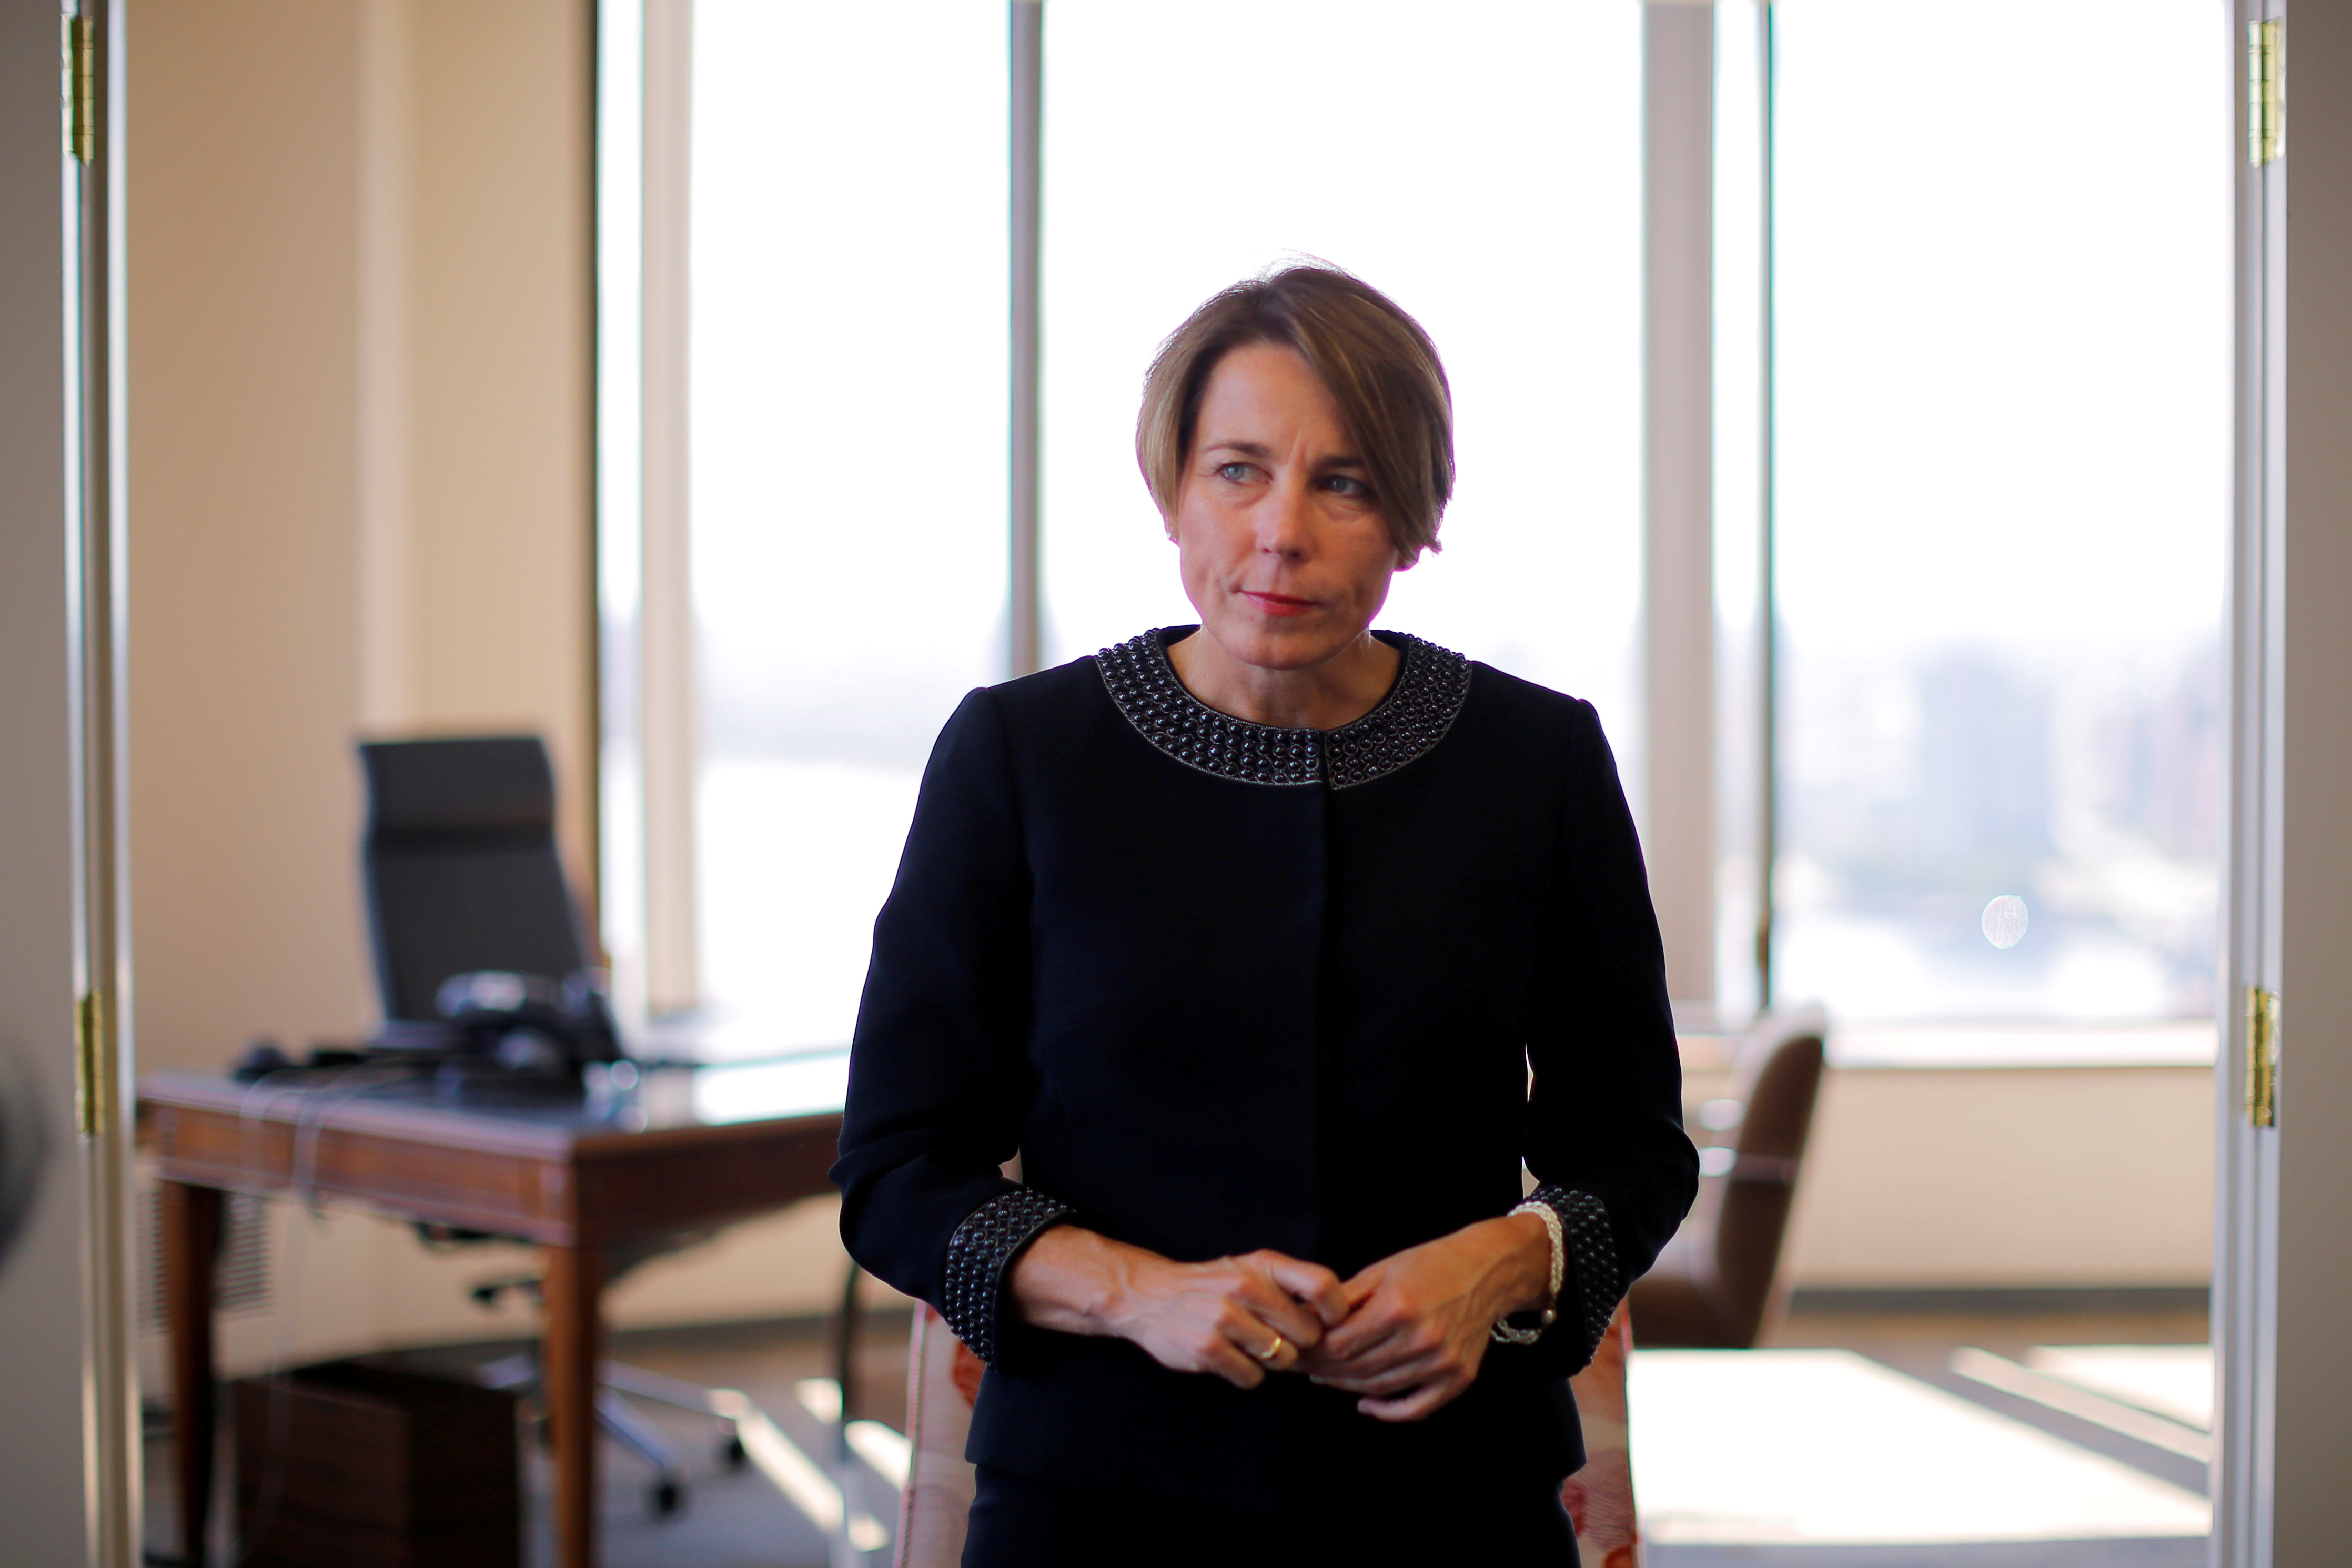 Massachusetts Attorney General Maura Healey listens to a question during an interview with Reuters at her office in Boston